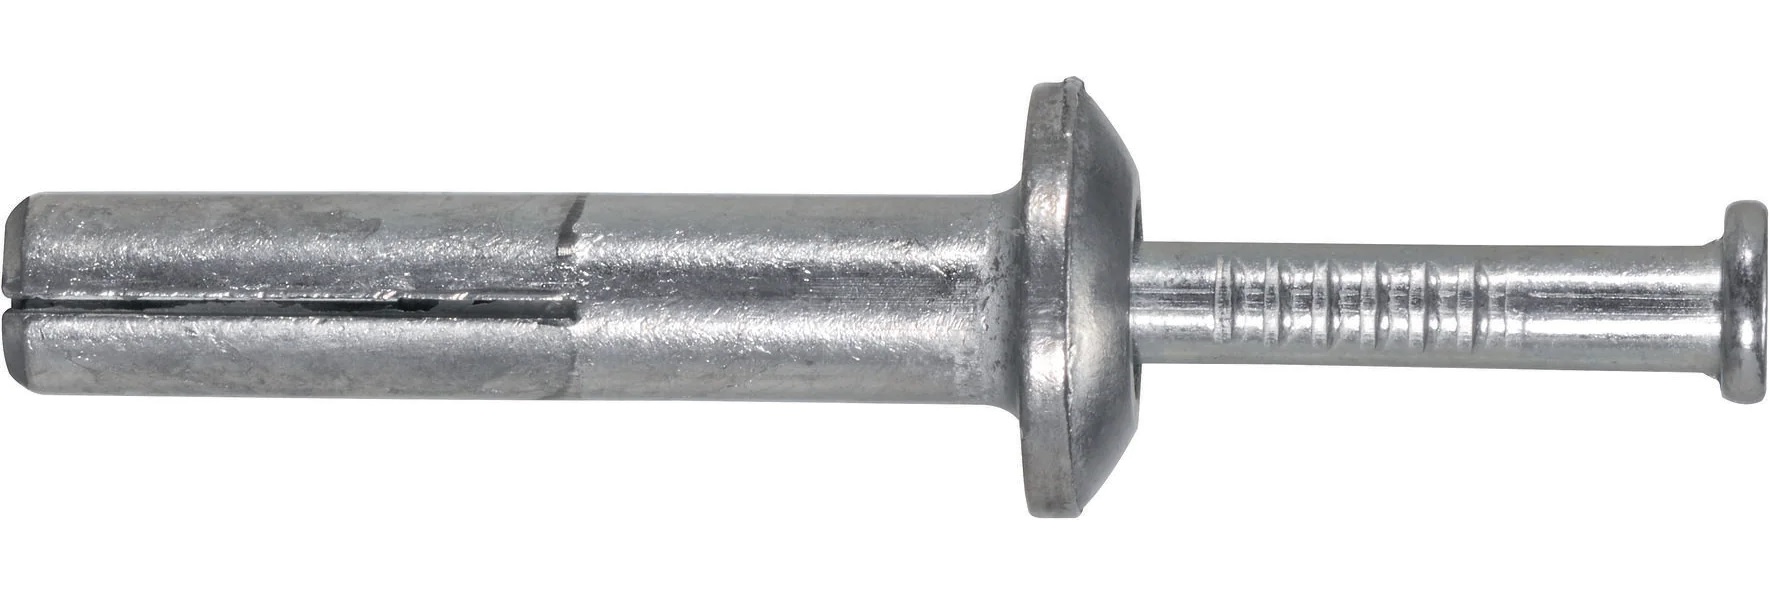 Metal anchor HMH 1/4" x 1" SS (Sold in BOX of 100)